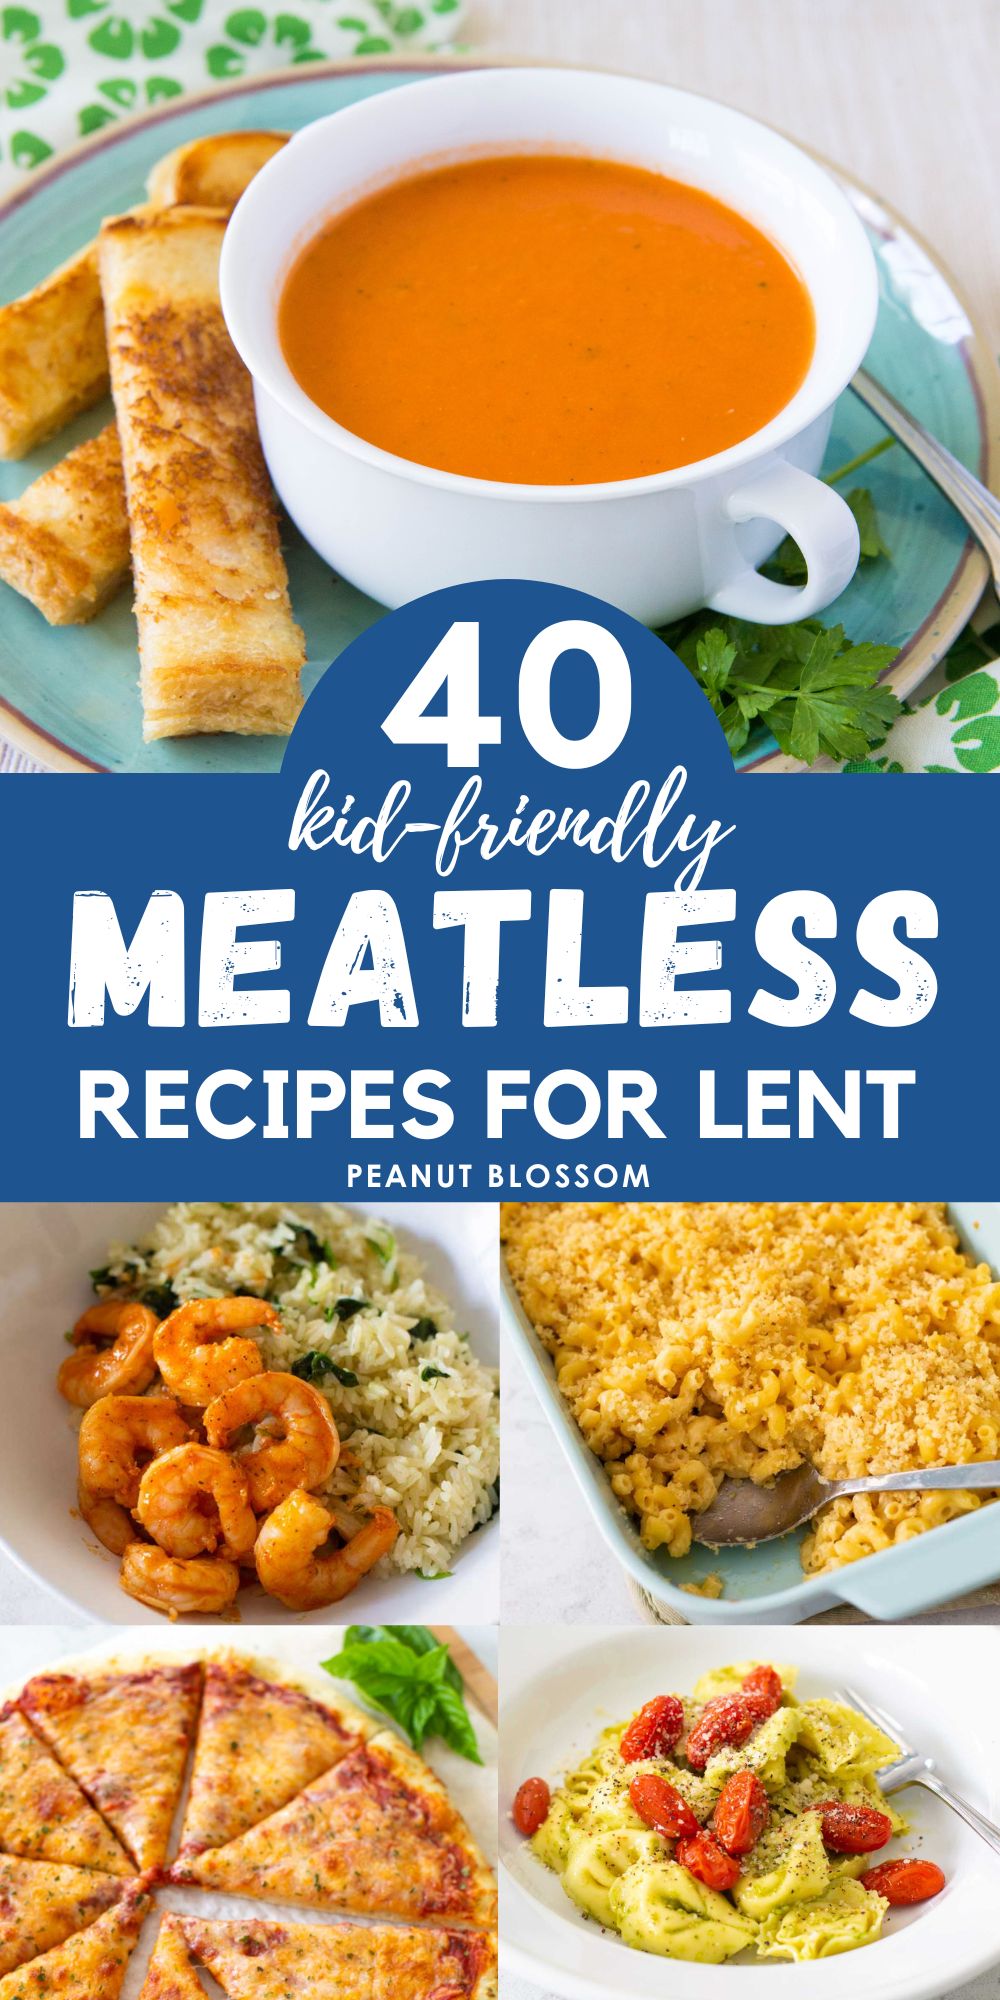 A photo collage shows 5 different meatless dinner ideas for kids during Lent.